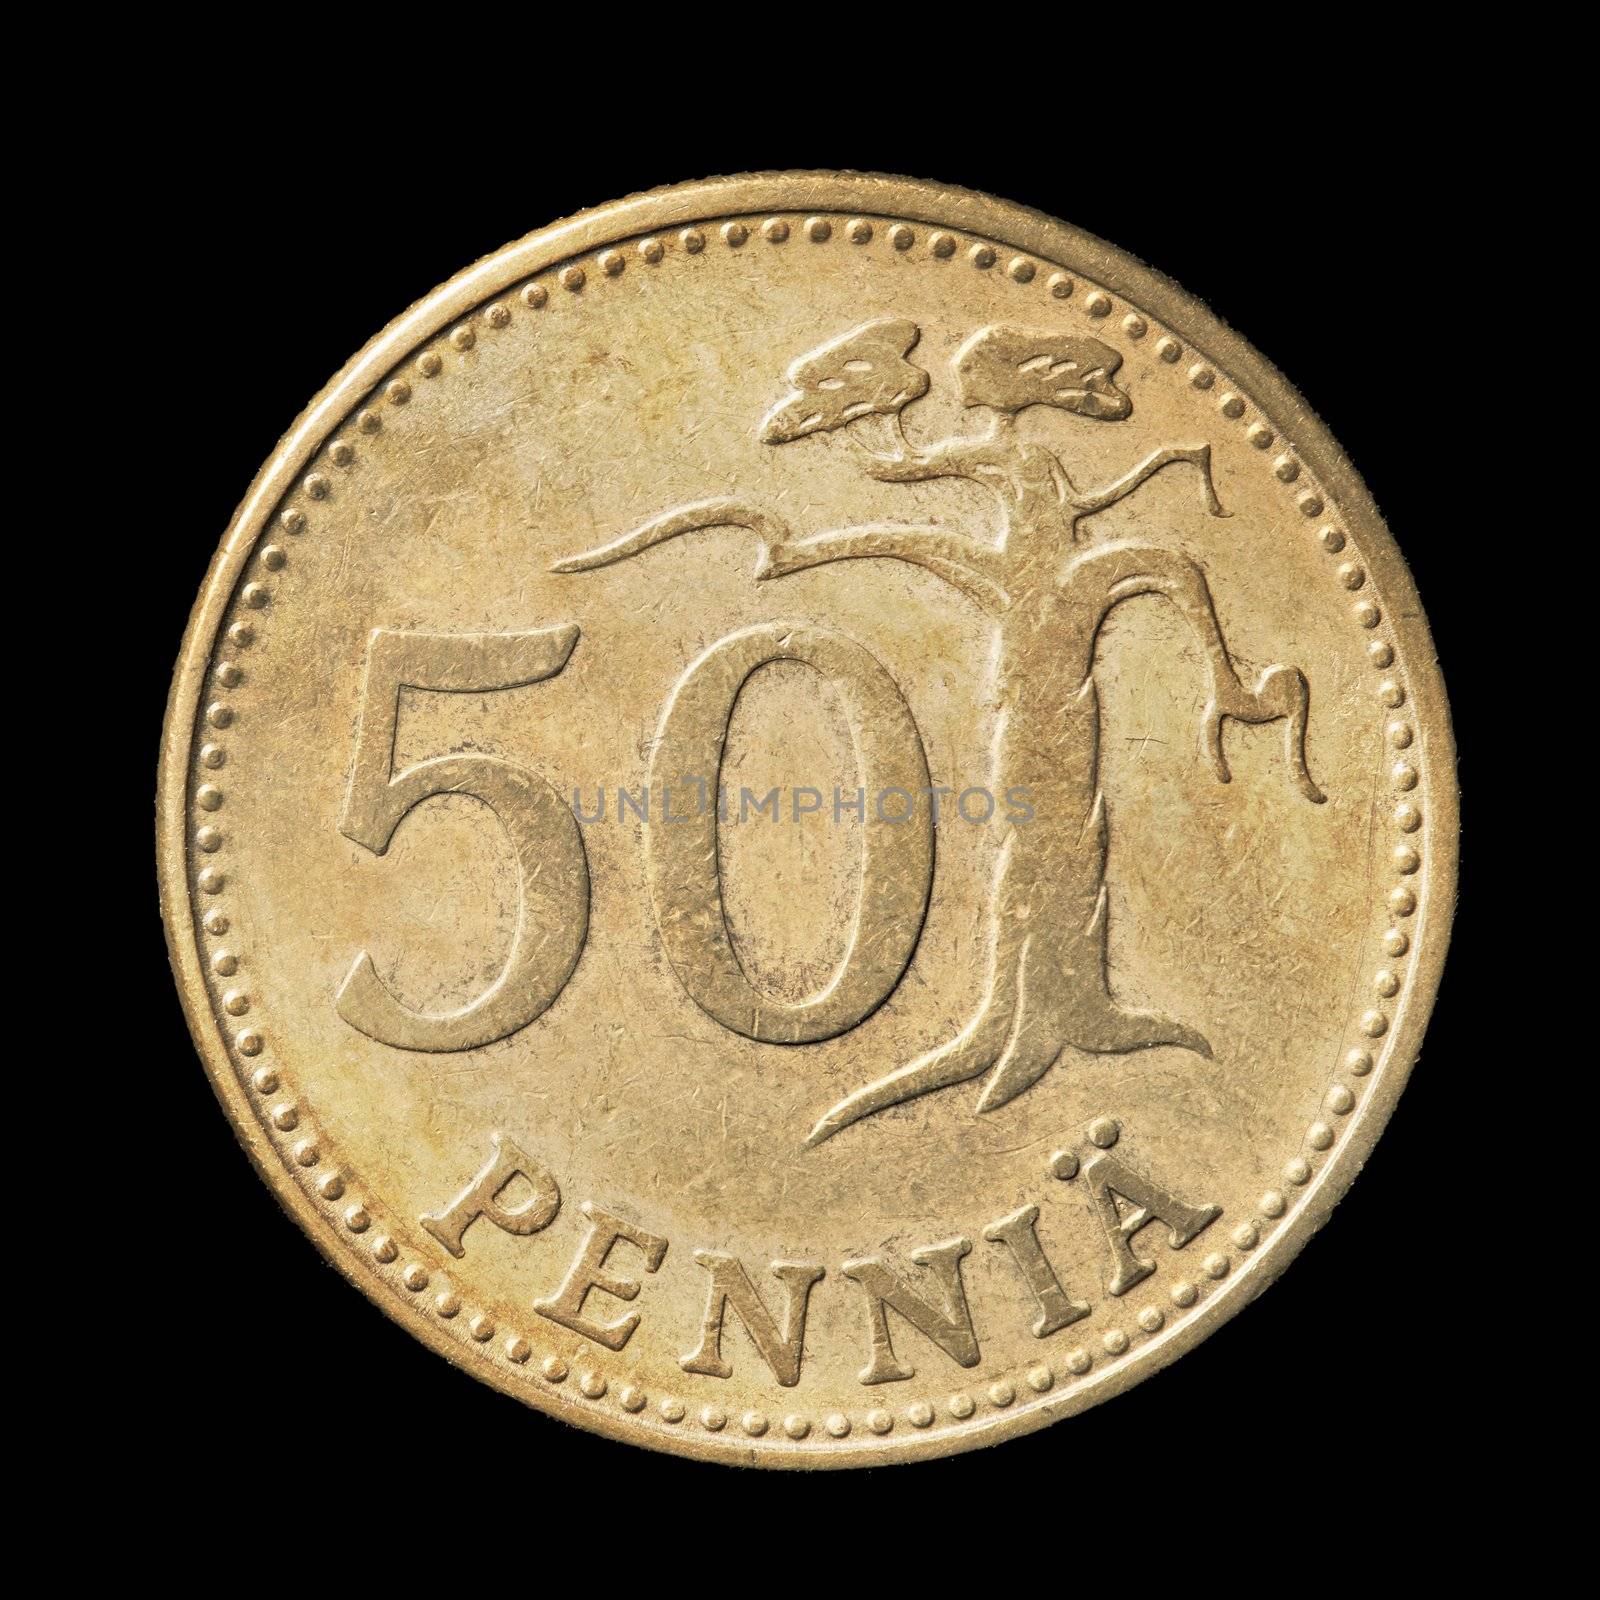 Finnish 50 penni coin from circa 1963 on black background.